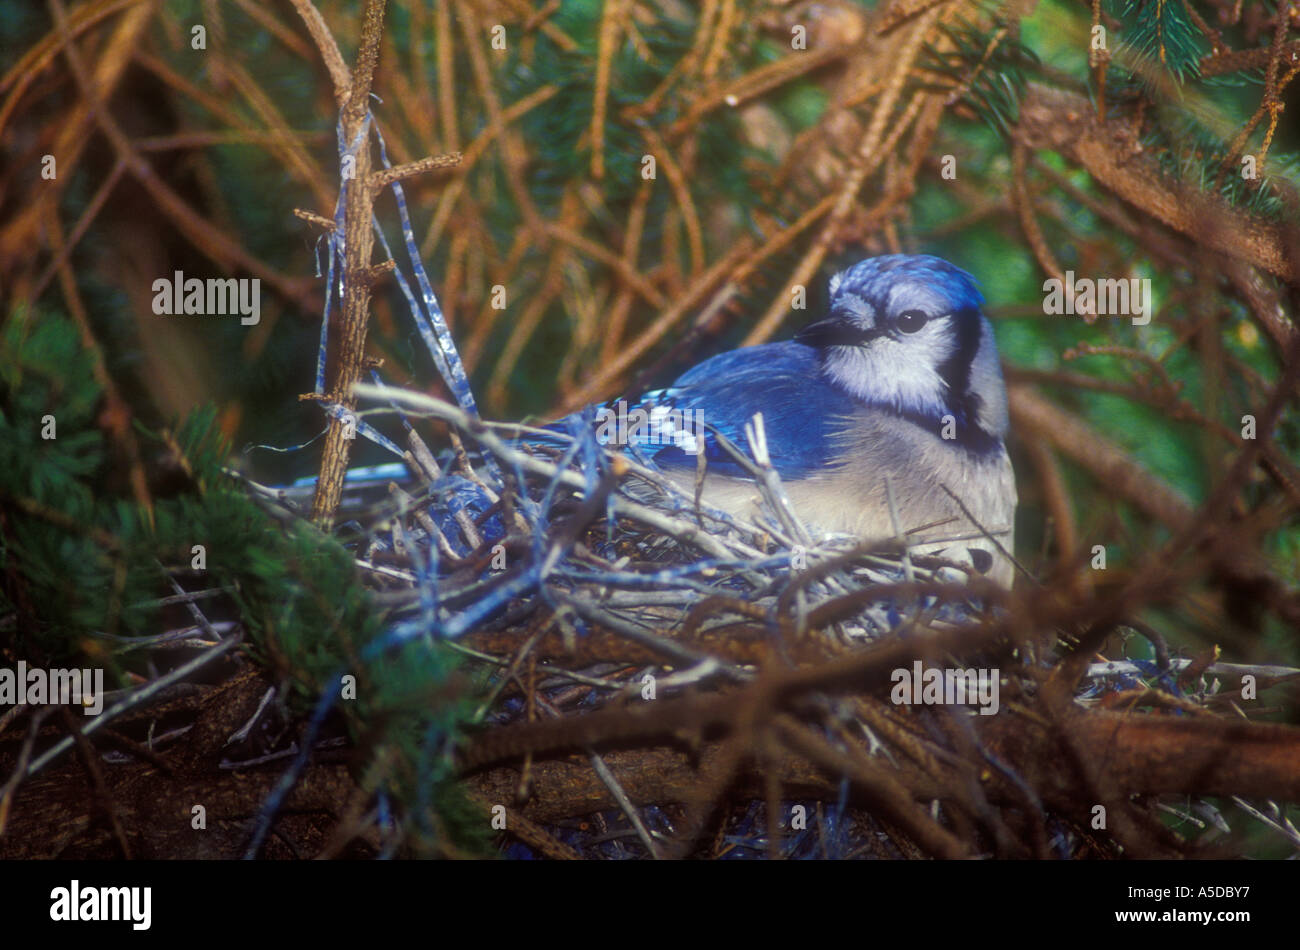 Blue Jay Cyanocitta Cristata Adult Incubating Eggs In Stick Nest Decorated With Blue Material Wanup Ontario Stock Photo Alamy